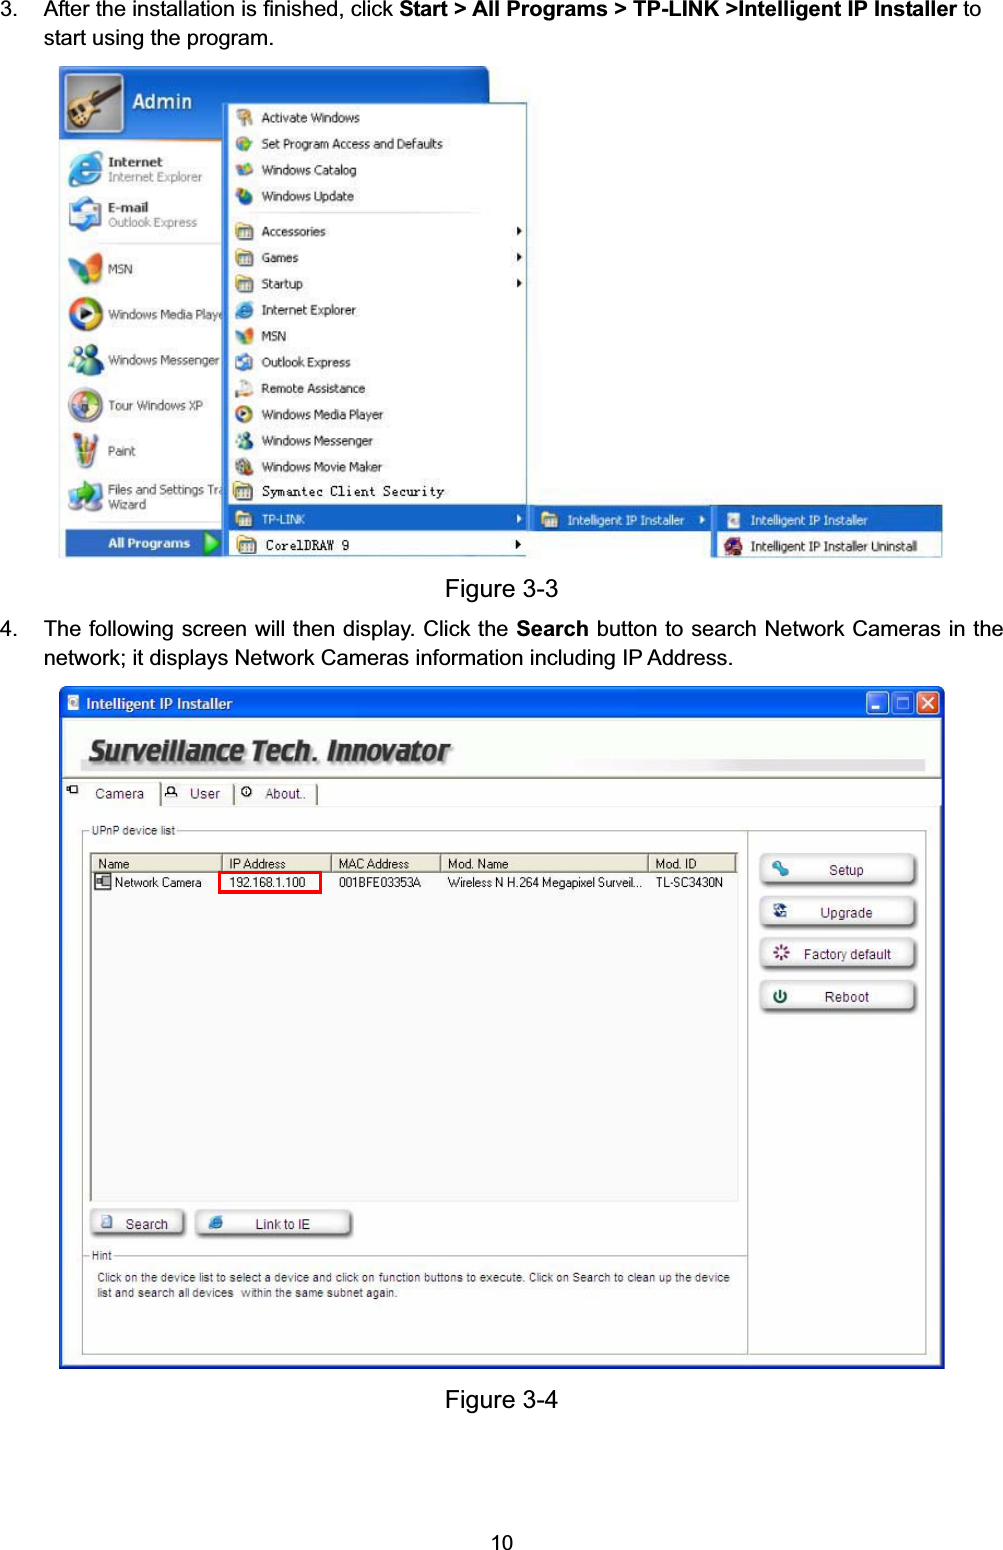   103.  After the installation is finished, click Start &gt; All Programs &gt; TP-LINK &gt;Intelligent IP Installer to start using the program.  Figure 3-3 4.  The following screen will then display. Click the Search button to search Network Cameras in the network; it displays Network Cameras information including IP Address.  Figure 3-4  